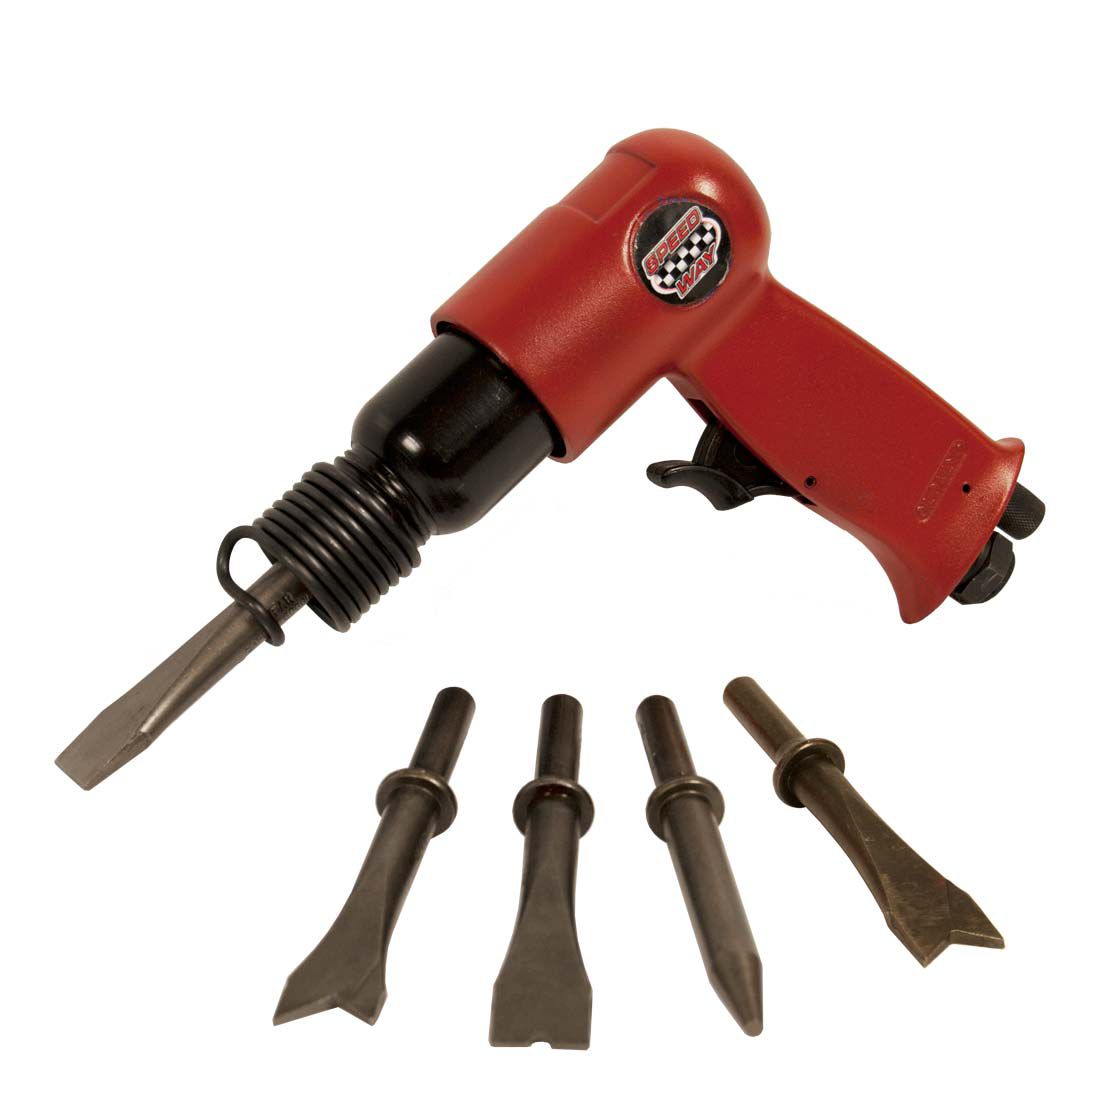 Speedway Start to Finish Pneumatic Air 6 Inch Short Barrel Air Hammer (Chisels included)